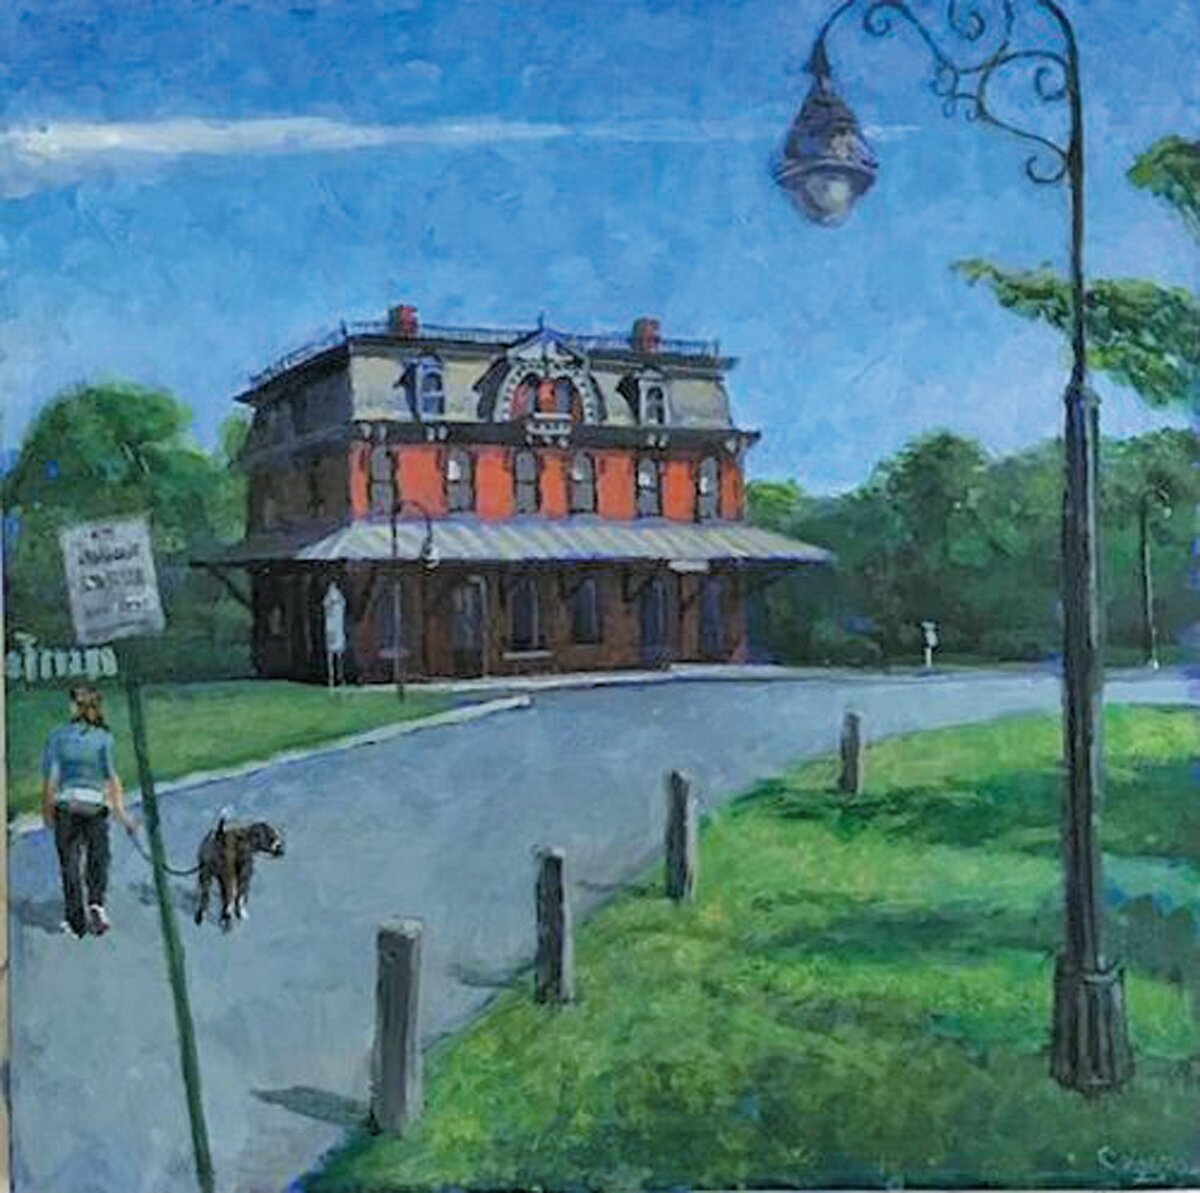 “The Train Station at New Hope” is an acrylic by Charles David Viera.